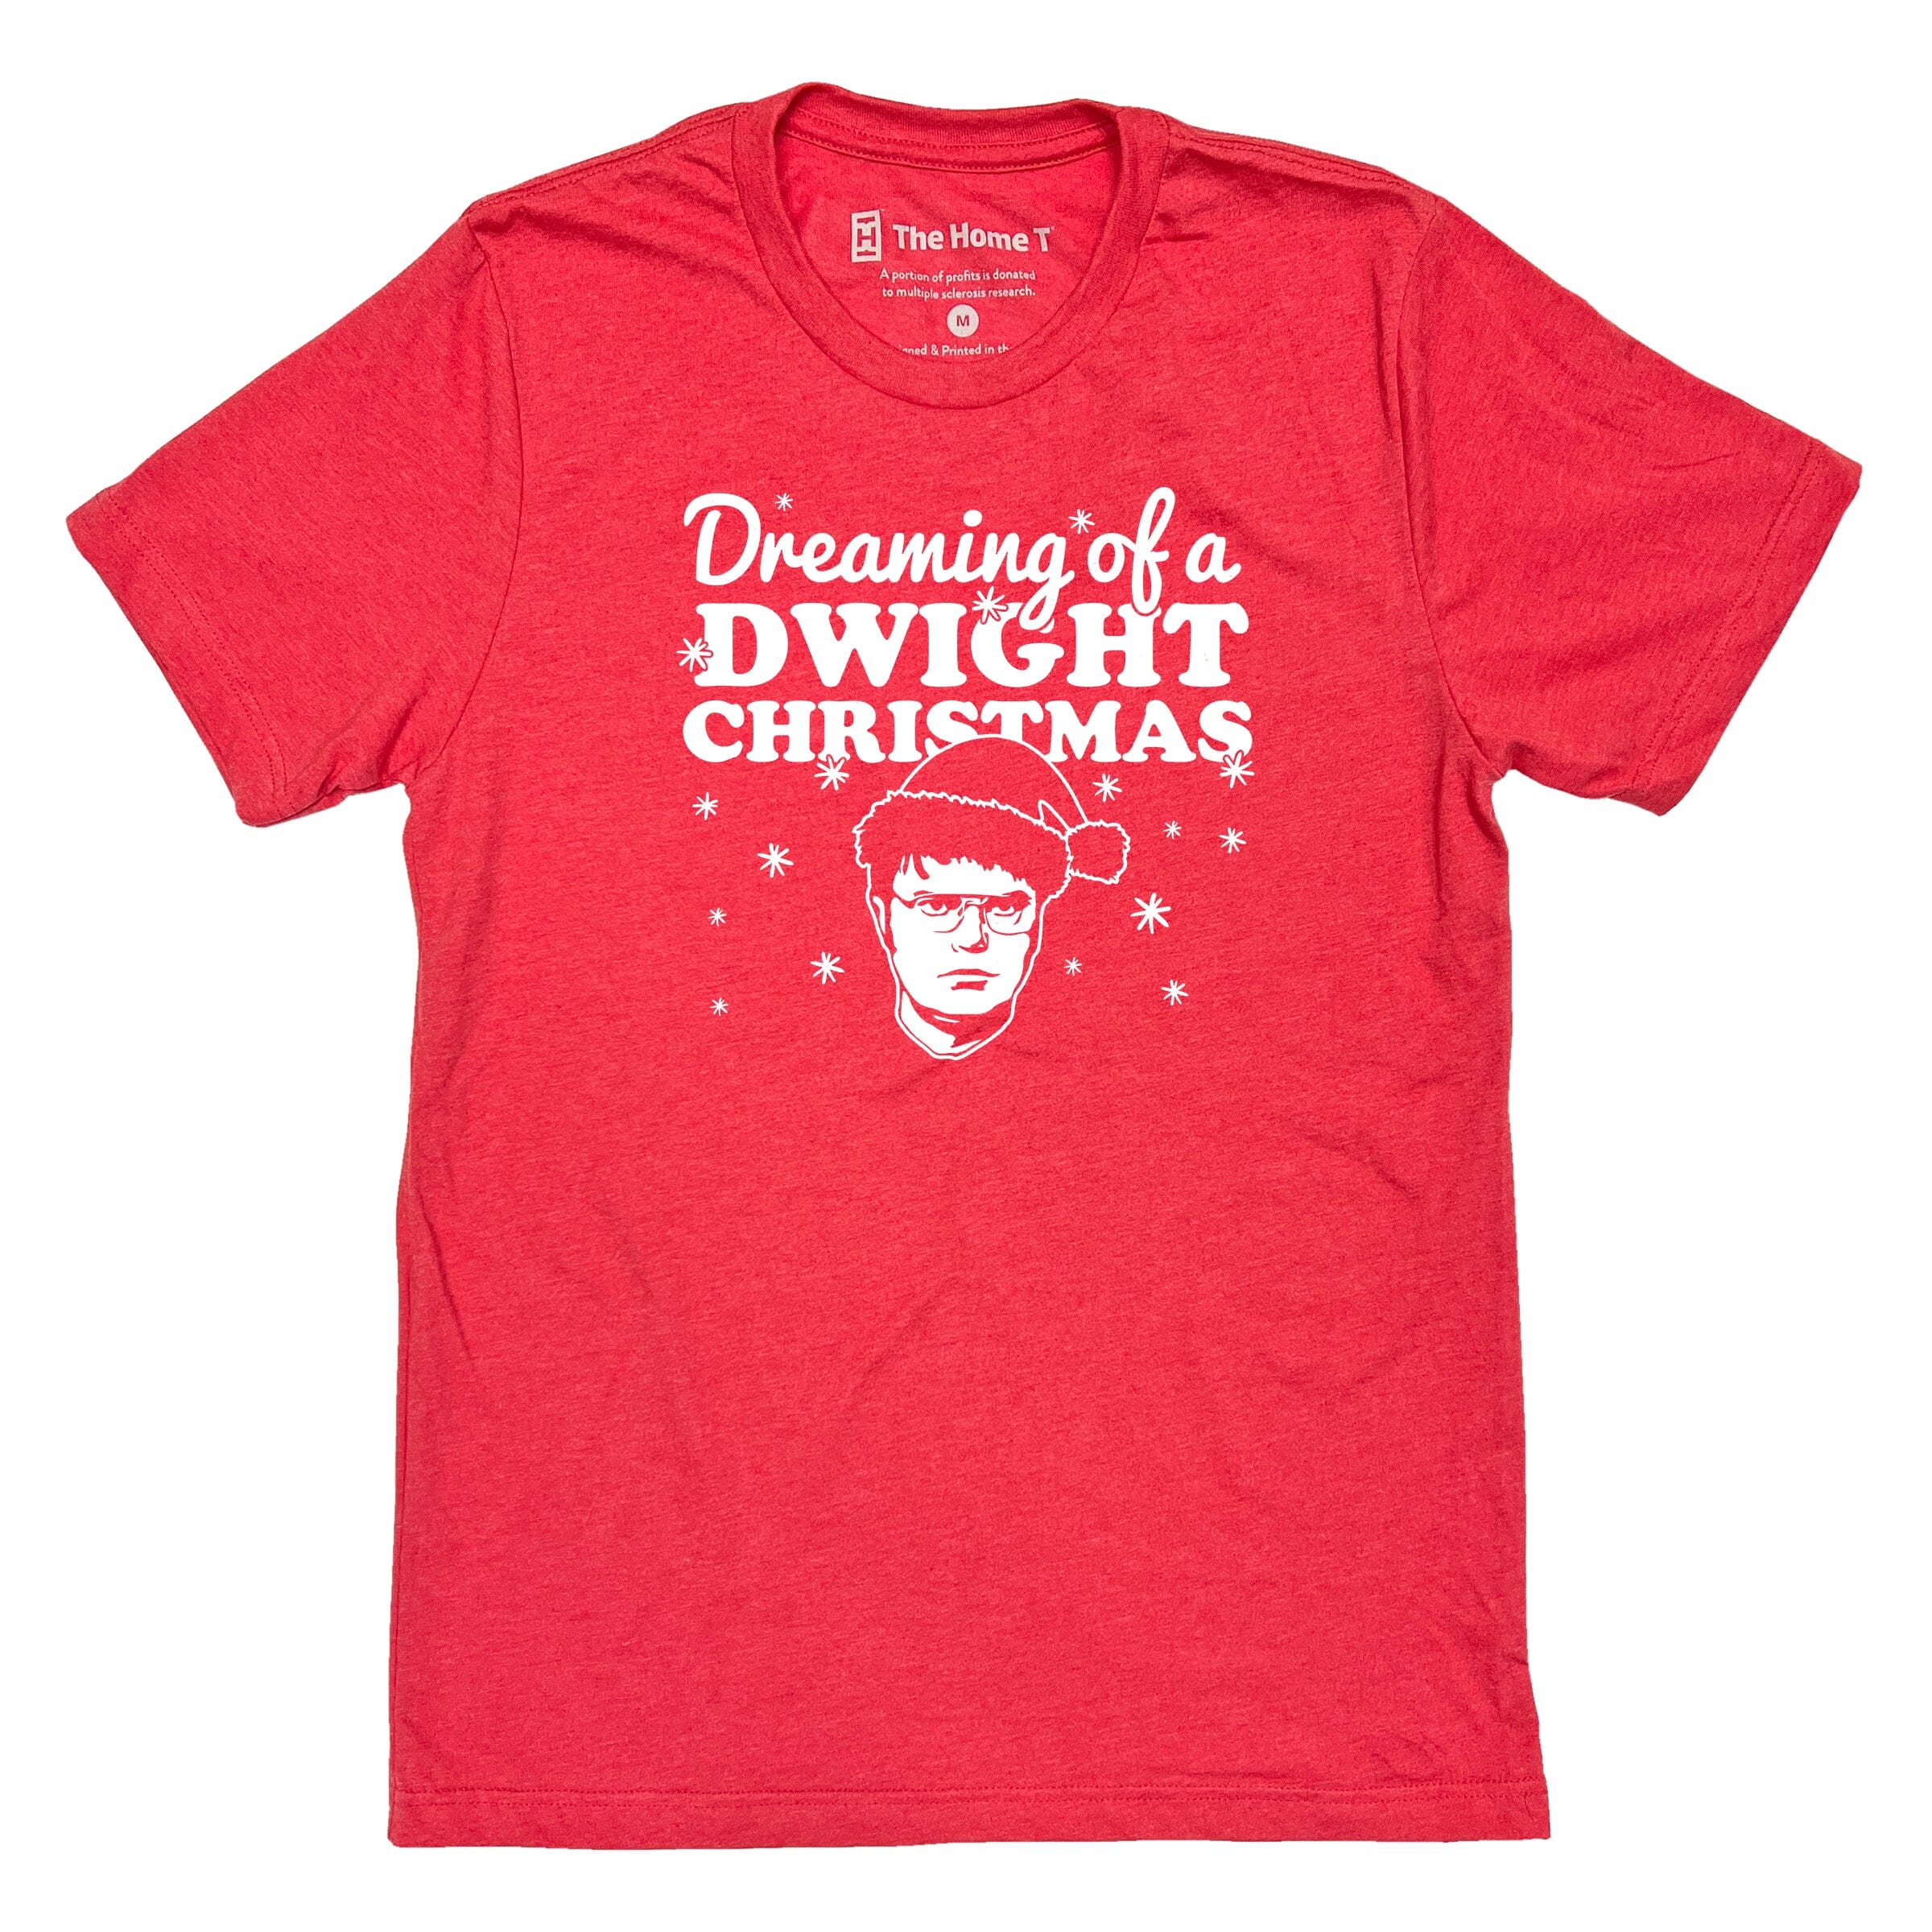 Dreaming of a Dwight Christmas